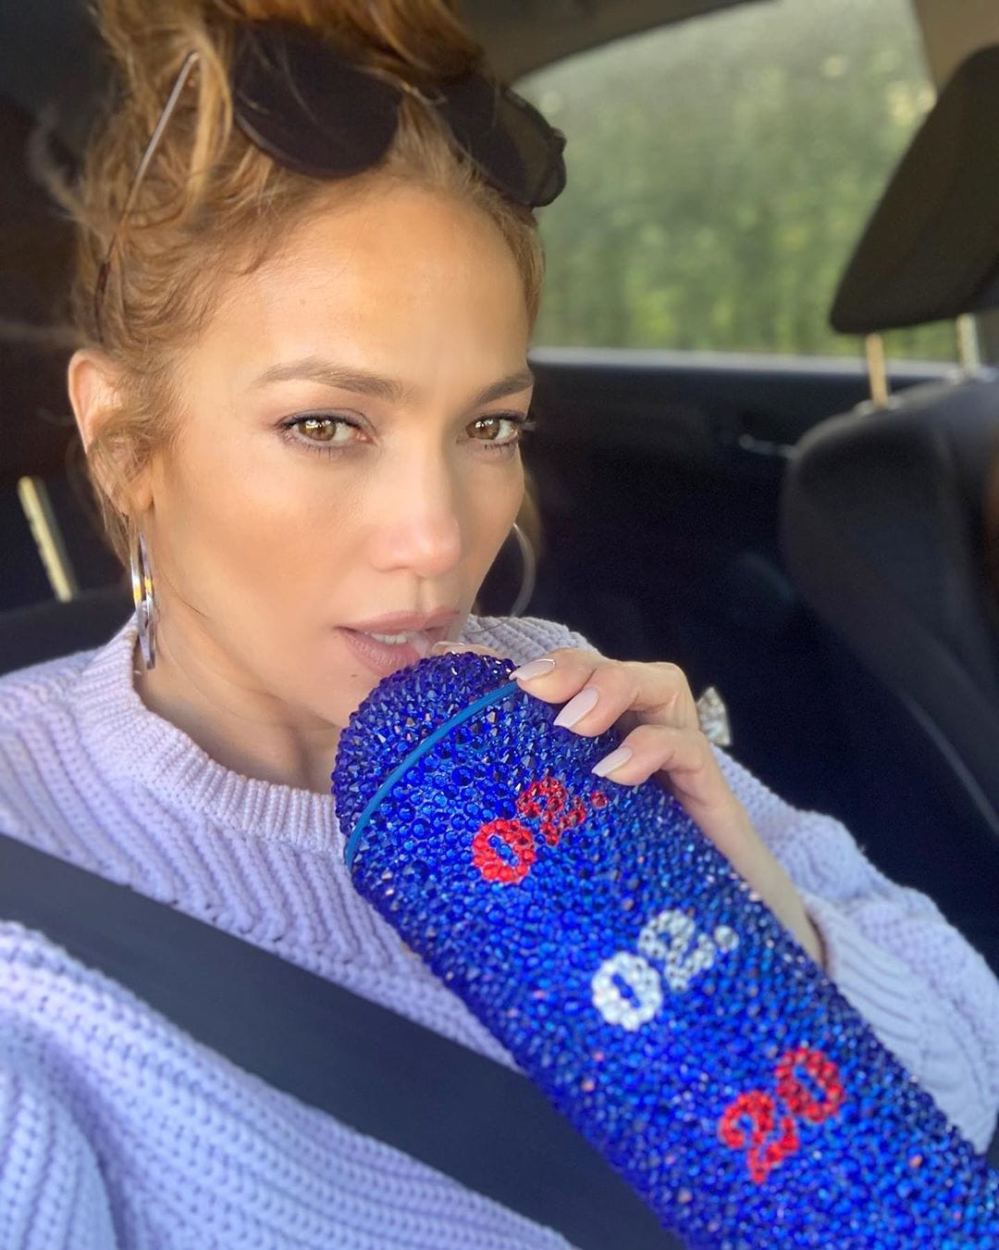 Jennifer Lopez Shows Off Her 'New Bling Cup' As She Prepares for Super Bowl LIV